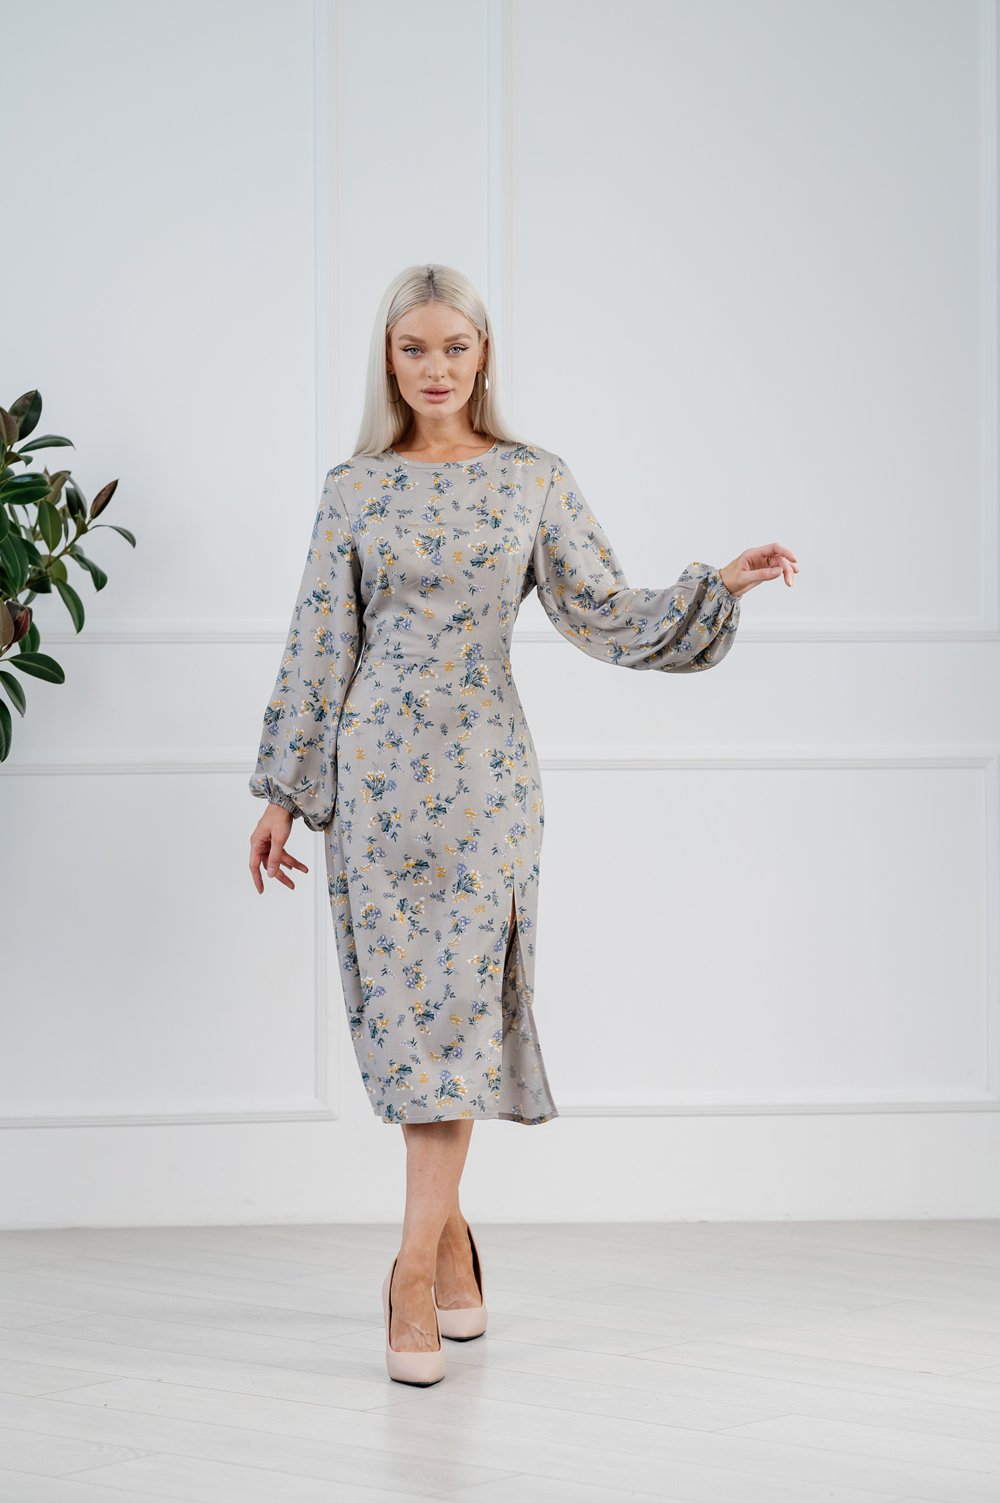 Ashy fitted midi dress in a floral print below the knee